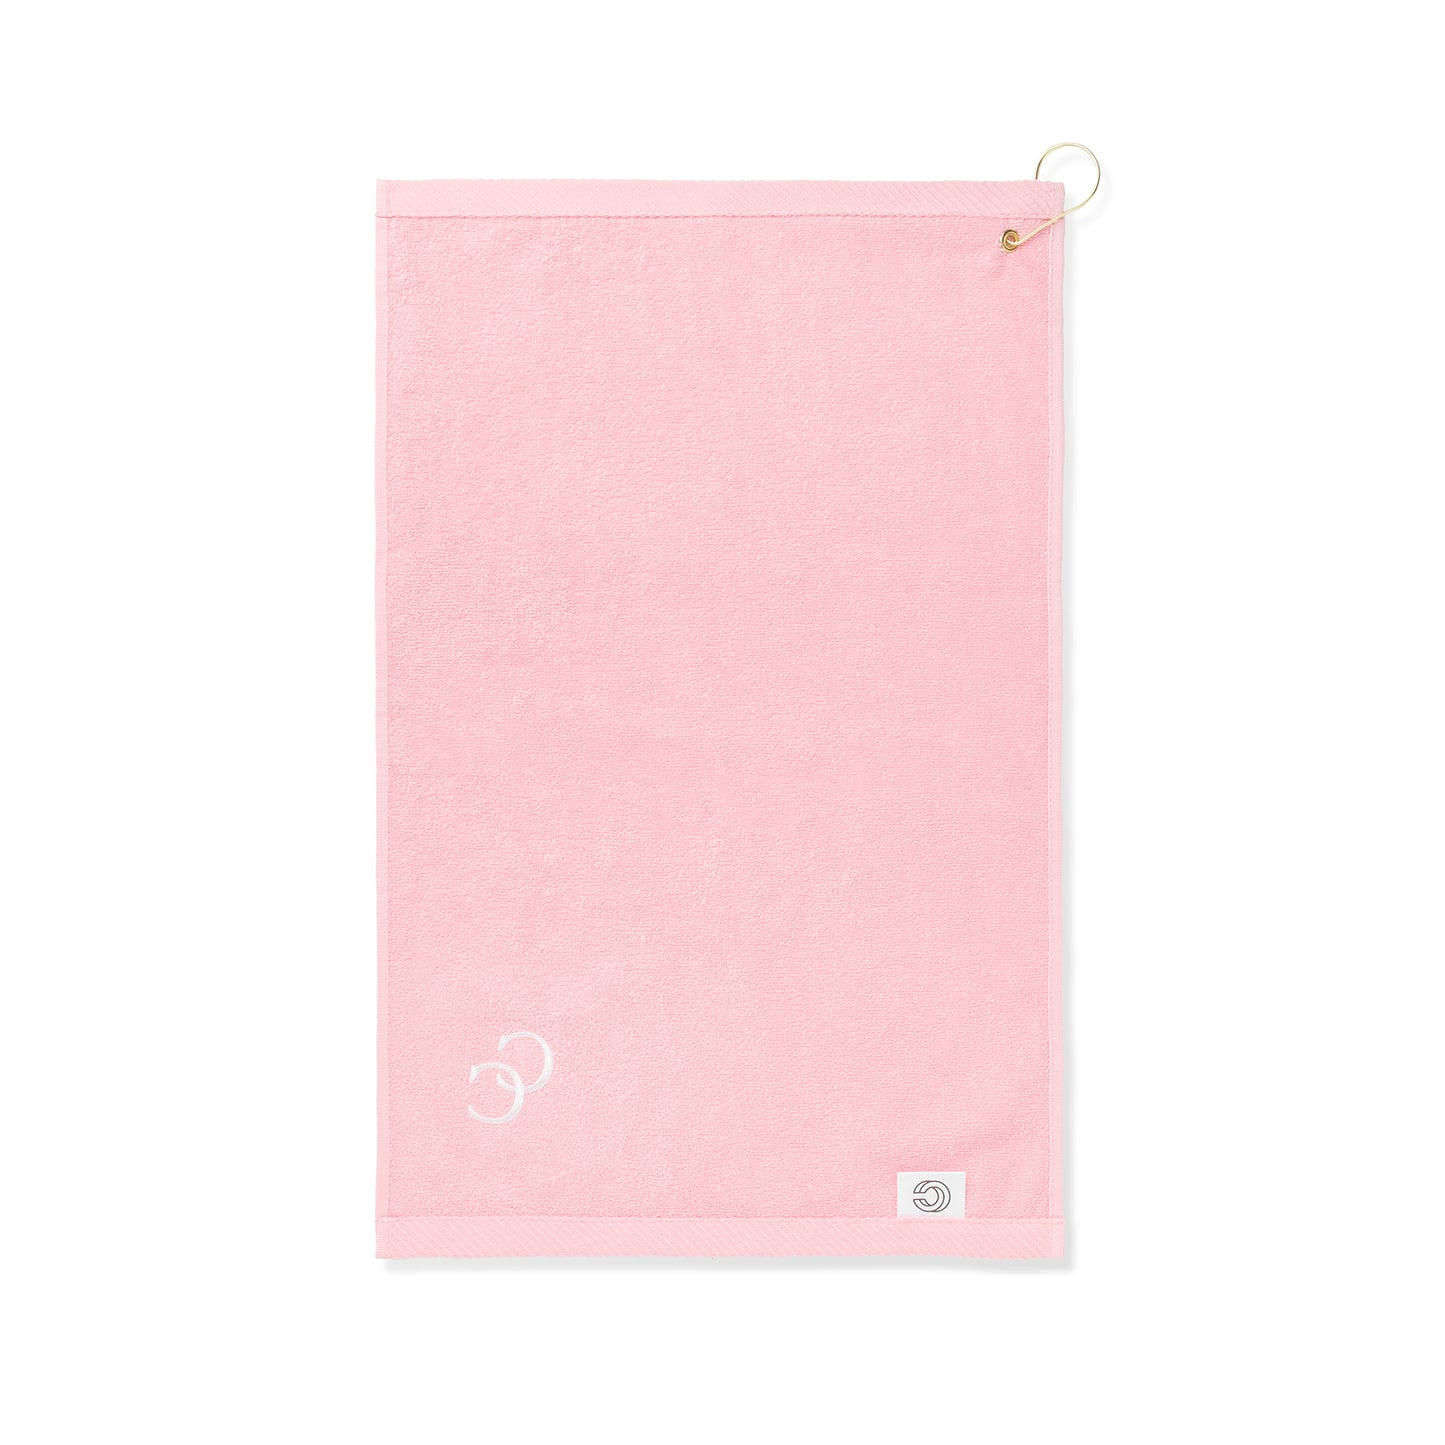 Concepts Clarity Sports Towel (Pink)